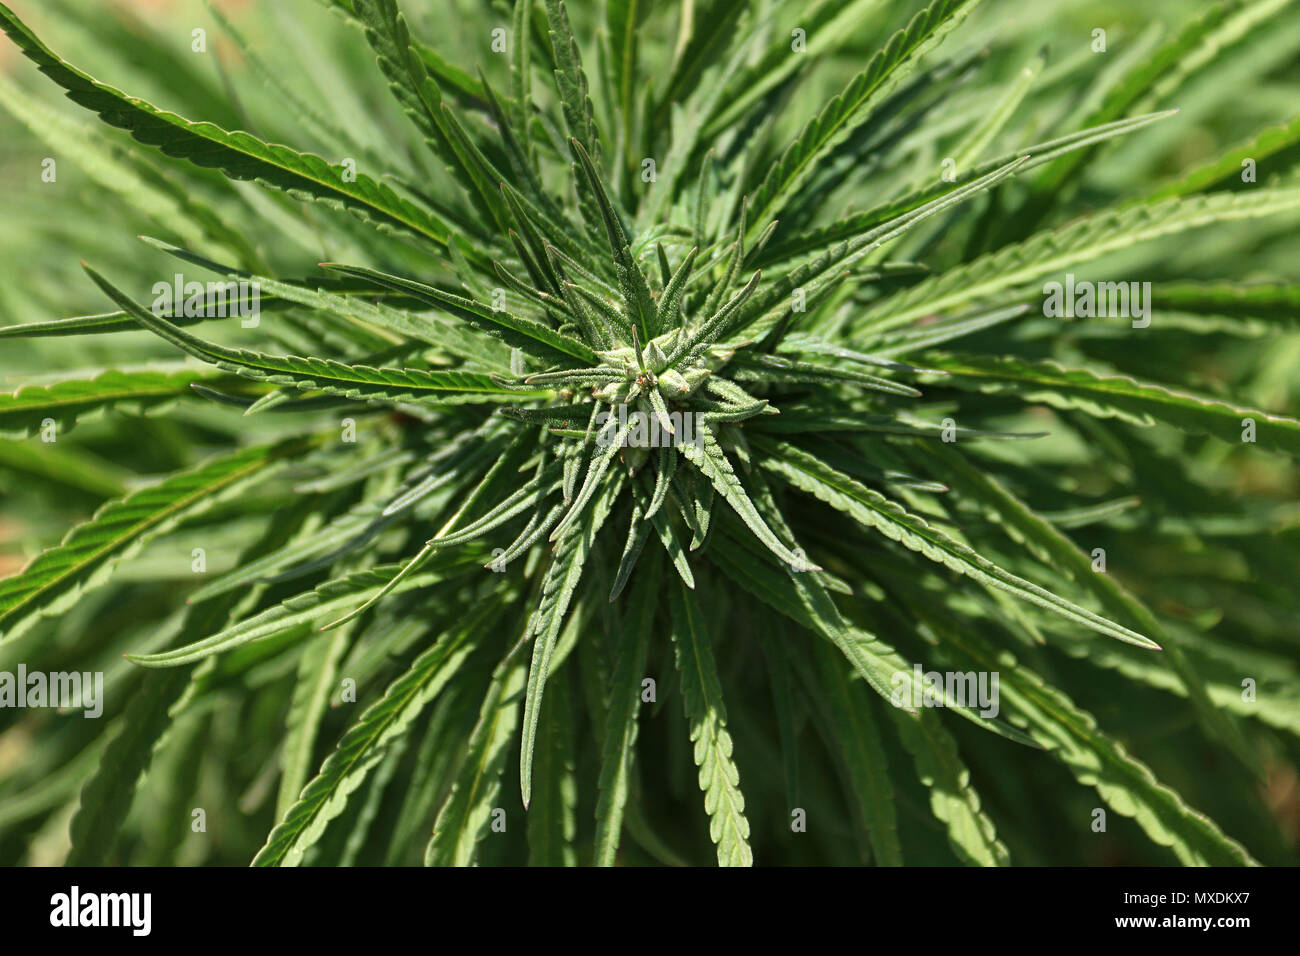 Close-up of a Cannabis Sativa plant in a field in Lebanon. Lebanon is one of the top five producers in the world even though cannabis is illegal. Stock Photo